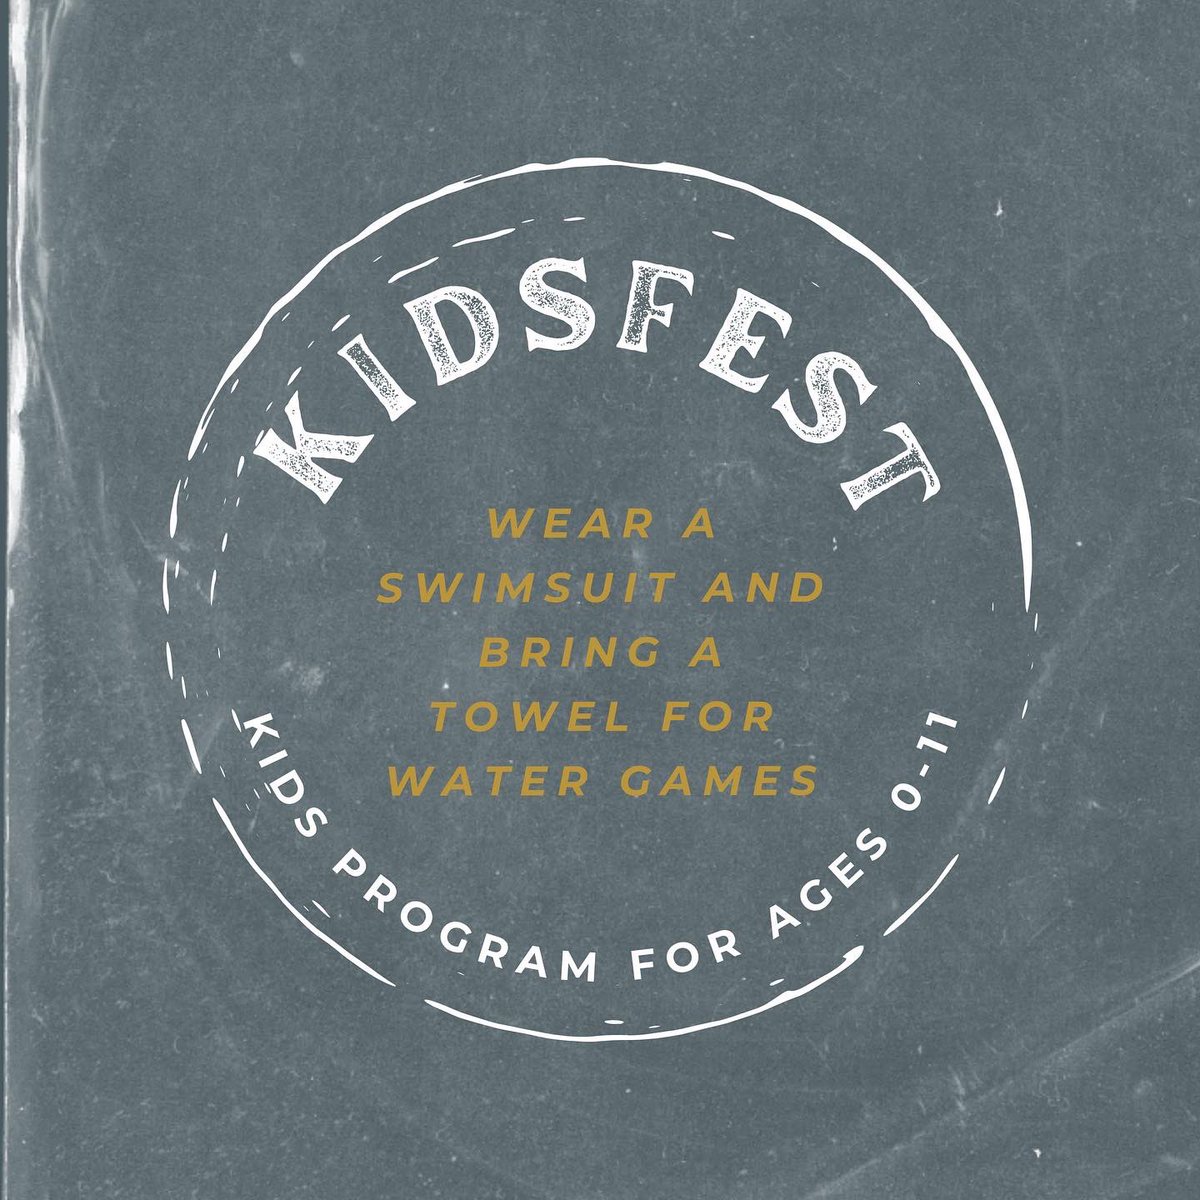 Join us tomorrow evening for Summerfest and Kidsfest!

Kidsfest drop-off begins at 6:00 pm in the Generations building and Summerfest begins at 6:30 pm in the Worship Center! #gcvsummerfest